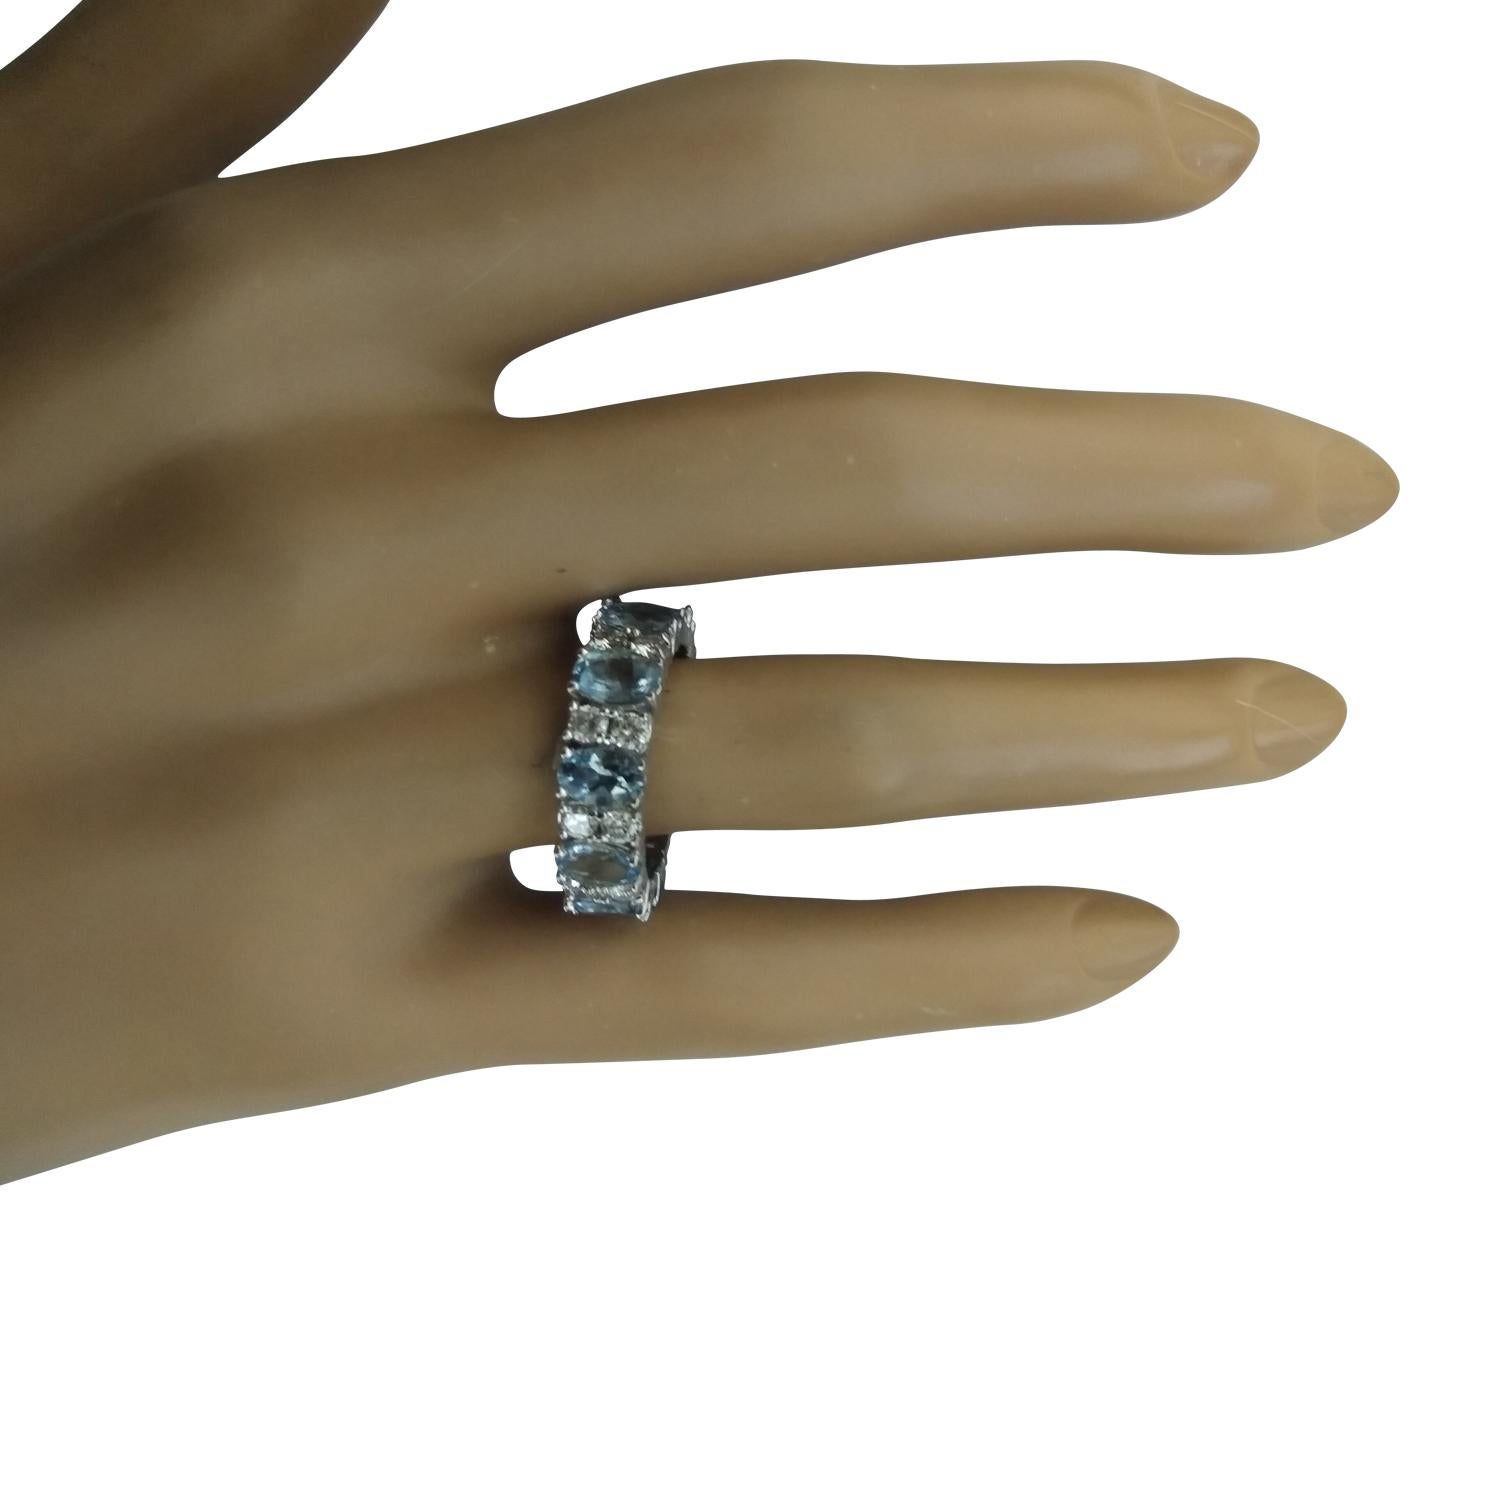 4.45 Carat Natural Aquamarine 14 Karat Solid White Gold Diamond Ring
Stamped: 14K 
Total Ring Weight: 5 Grams 
Aquamarine Weight 3.30 Carat (6.00x4.00 Millimeters)
Diamond Weight: 1.15 carat (F-G Color, VS2-SI1 Clarity)
Face Measures: 6.00